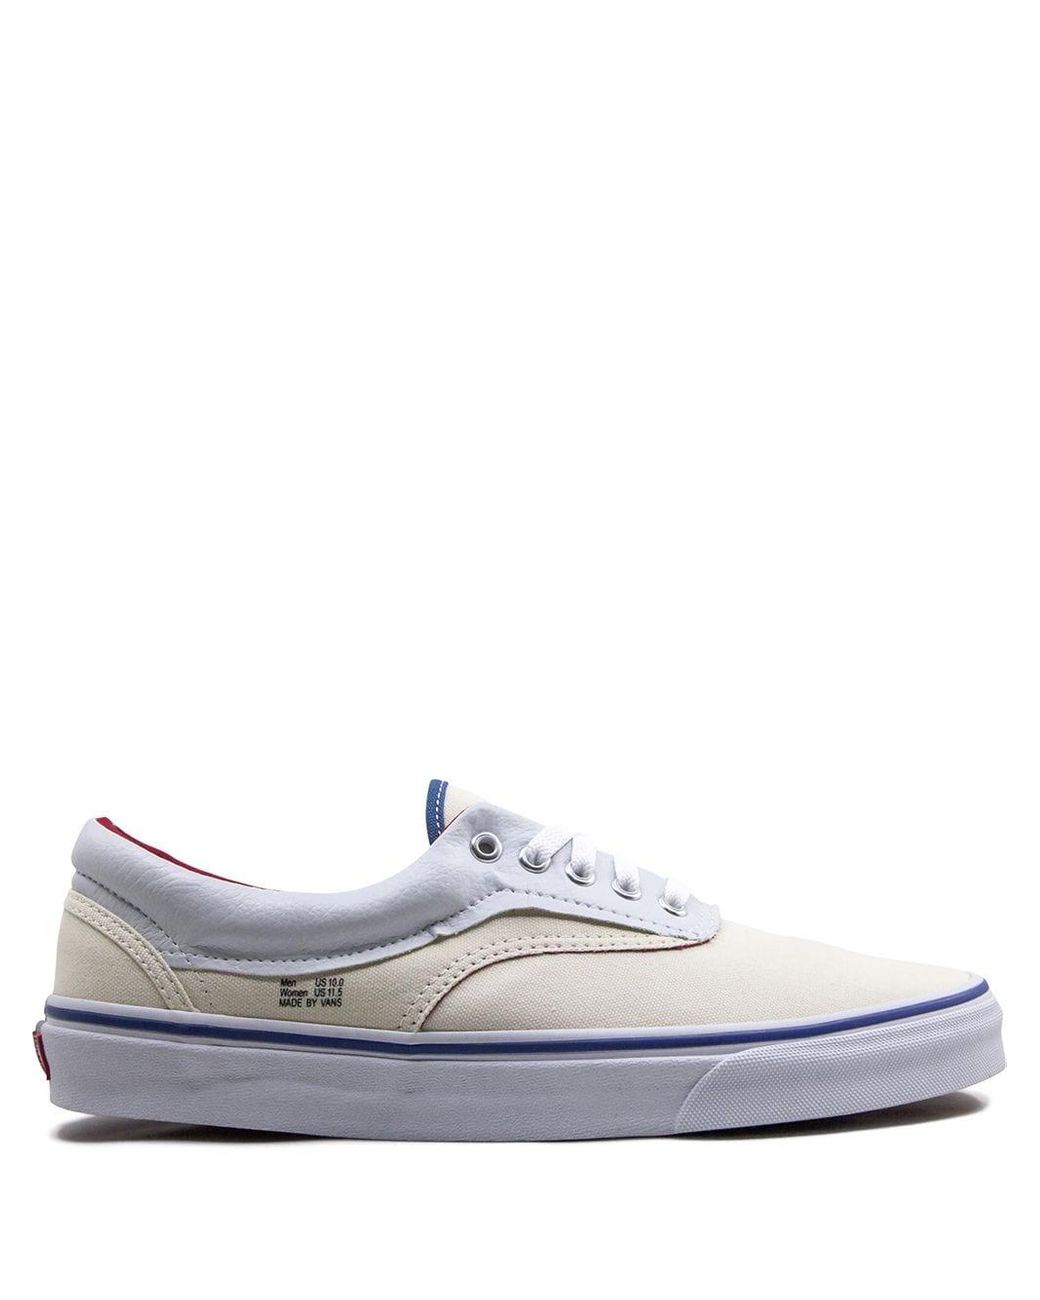 Vans Lace New Era Pro Low-top Sneakers in White for Men - Lyst